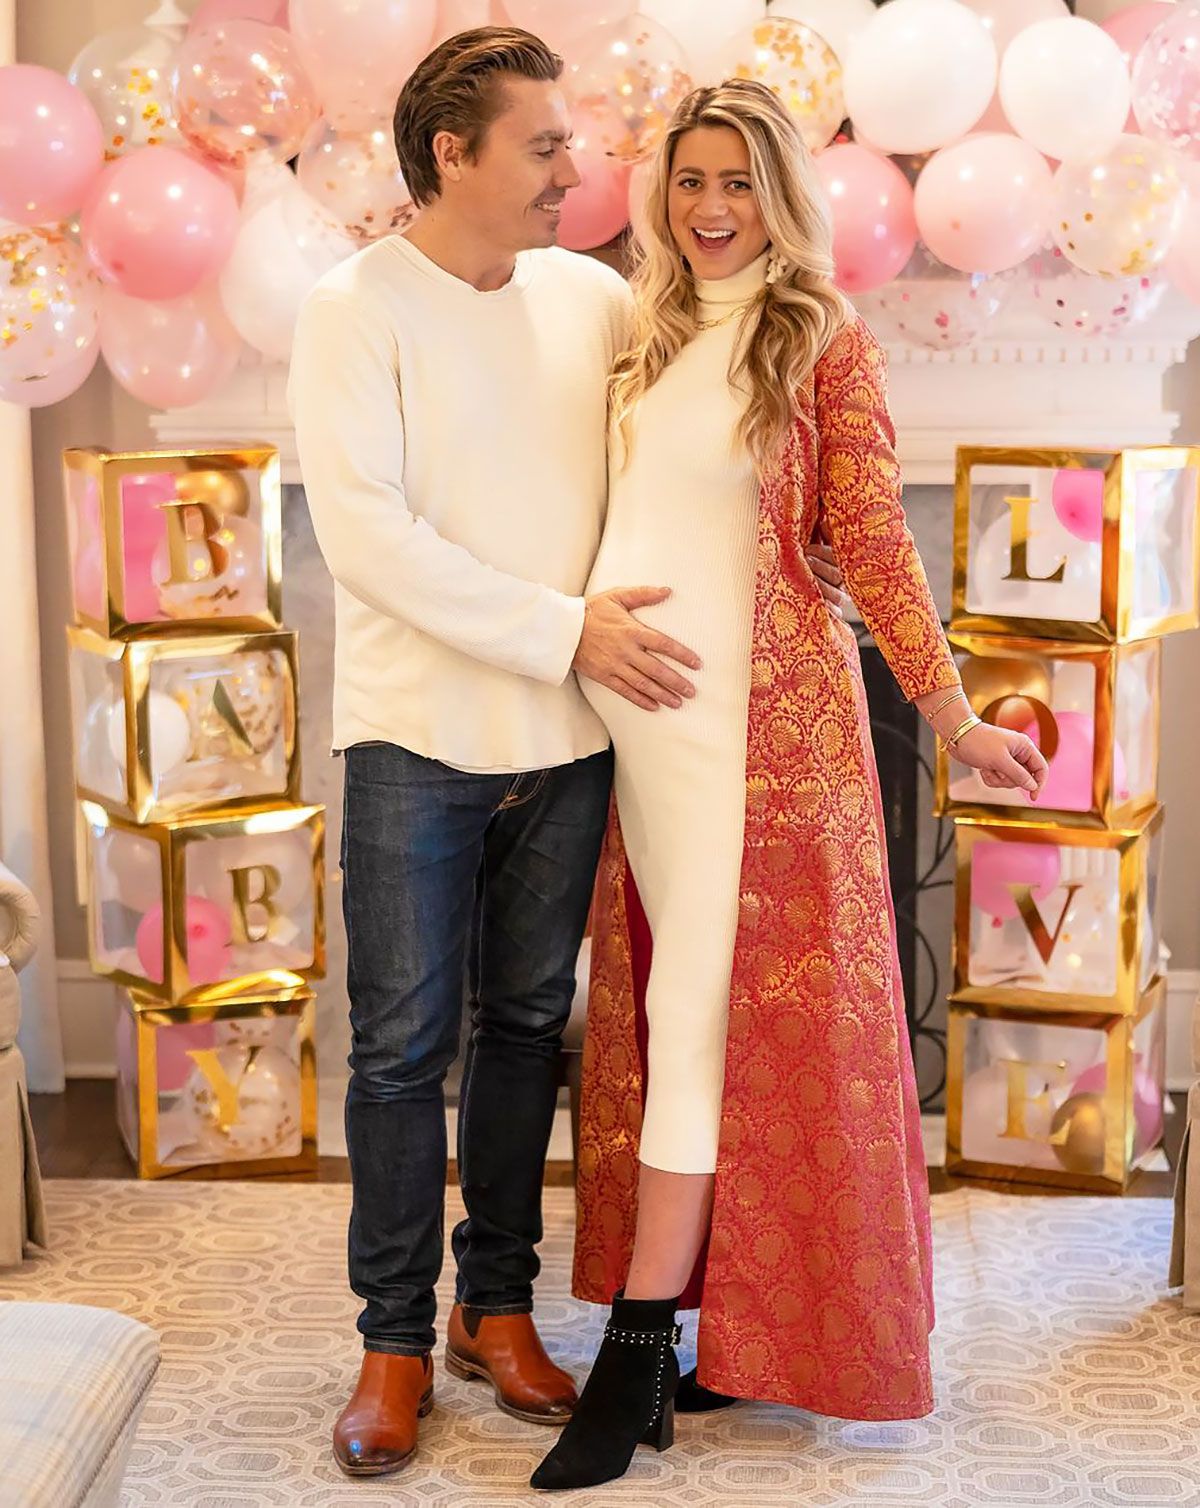 Lesley Anne Murphy, More Pregnant Stars Celebrate Baby Showers: Party Pics